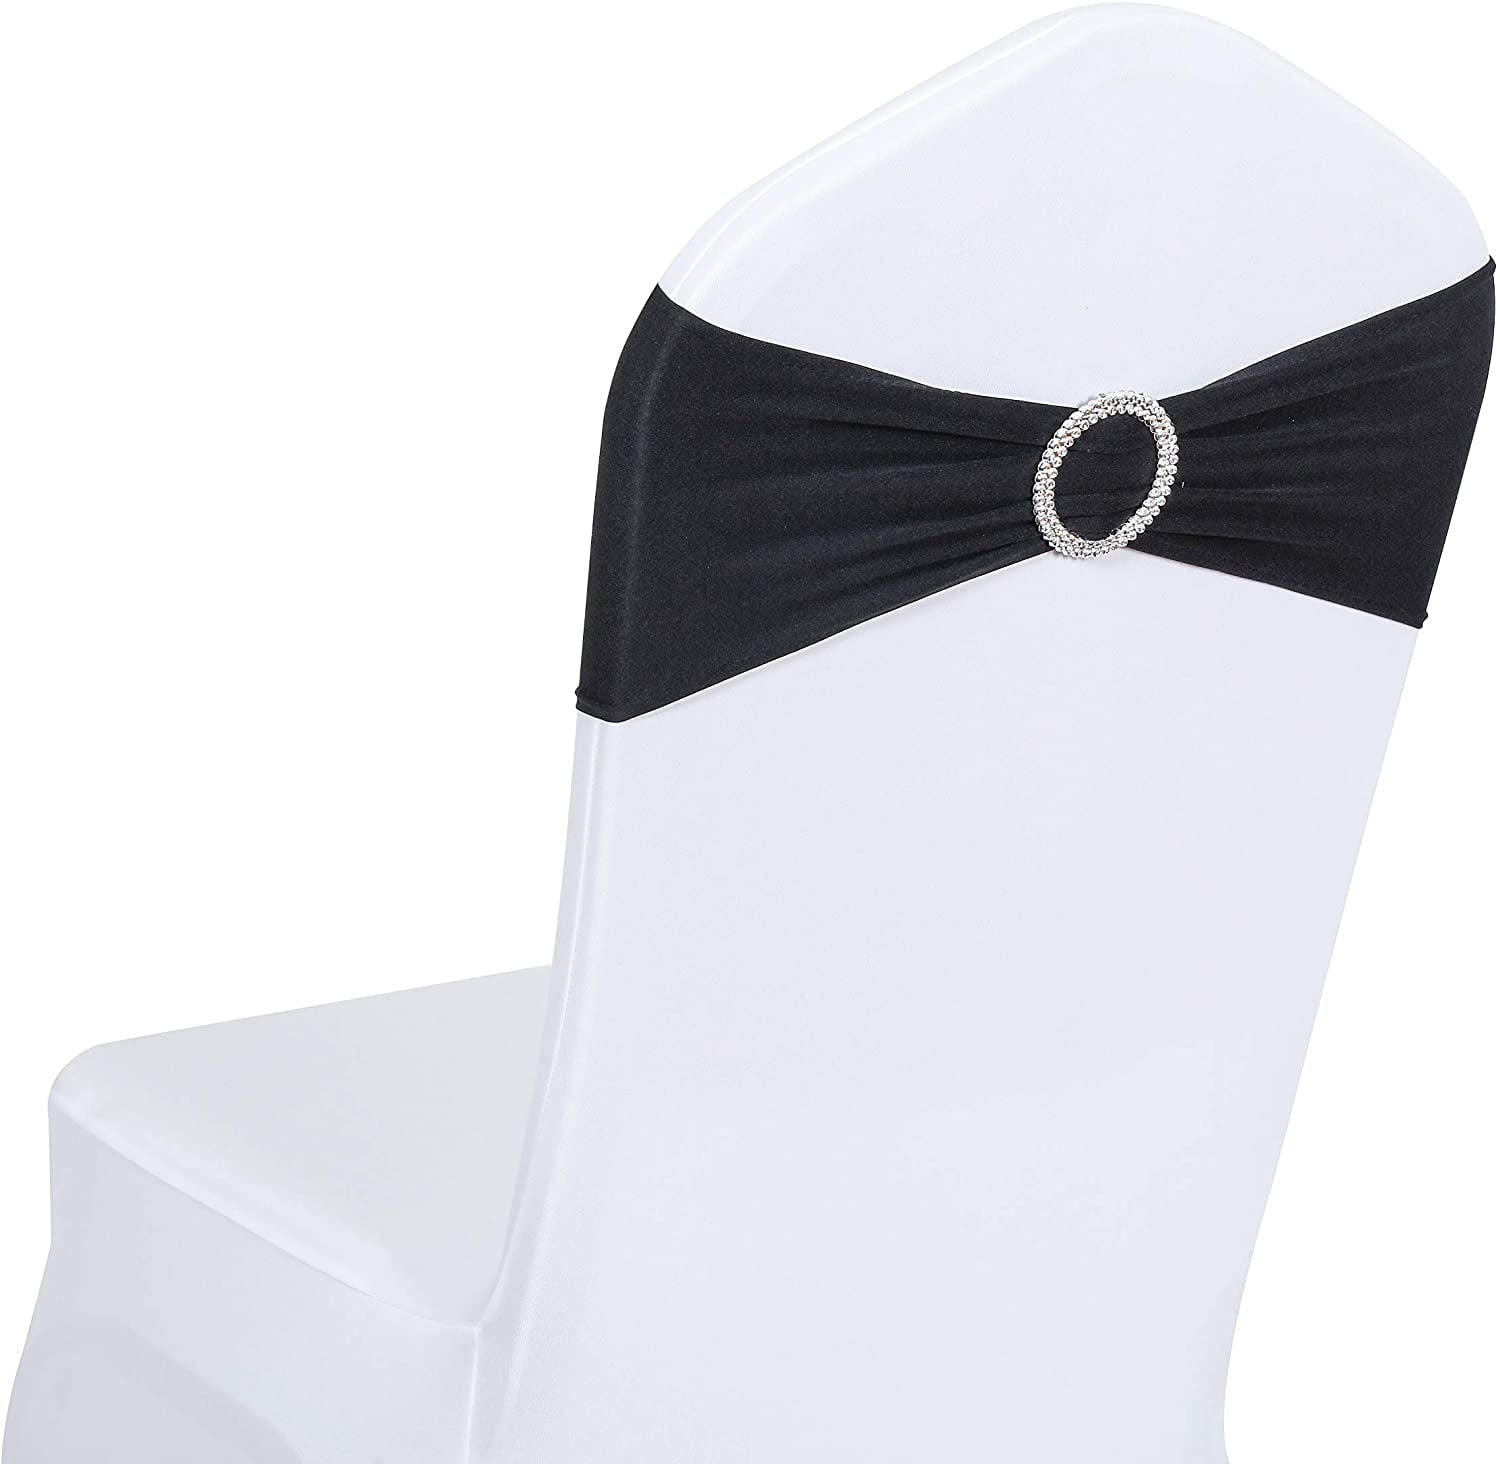 Stretch Spandex Chair Sash Wedding Party Decor Cover Band Buckle Bow S 